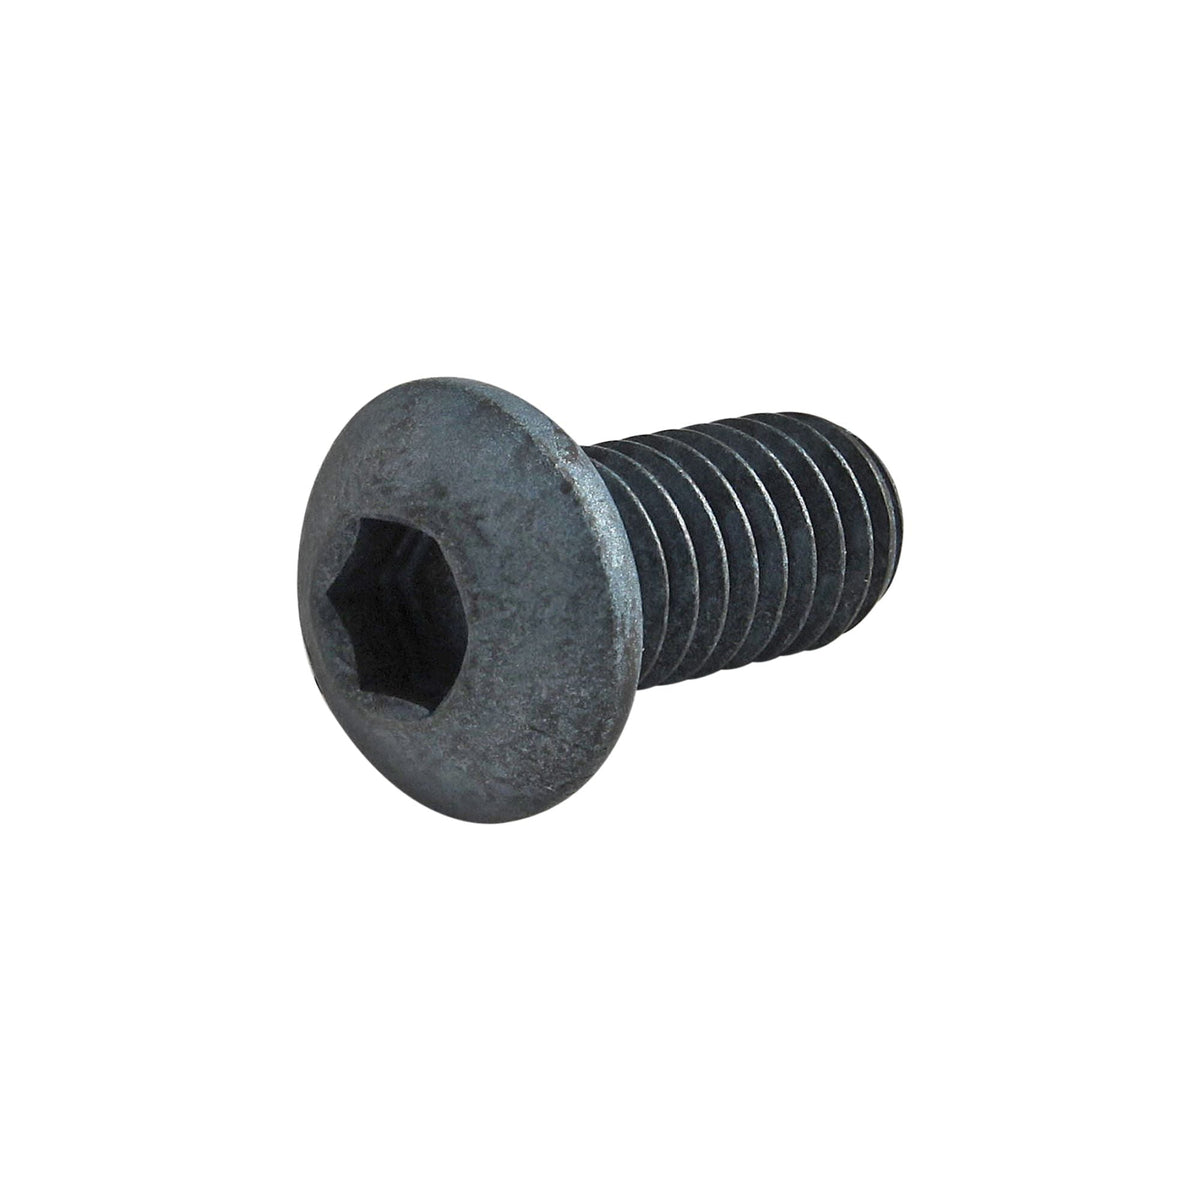 side view of a black screw with a hex head on the left and threading on the right